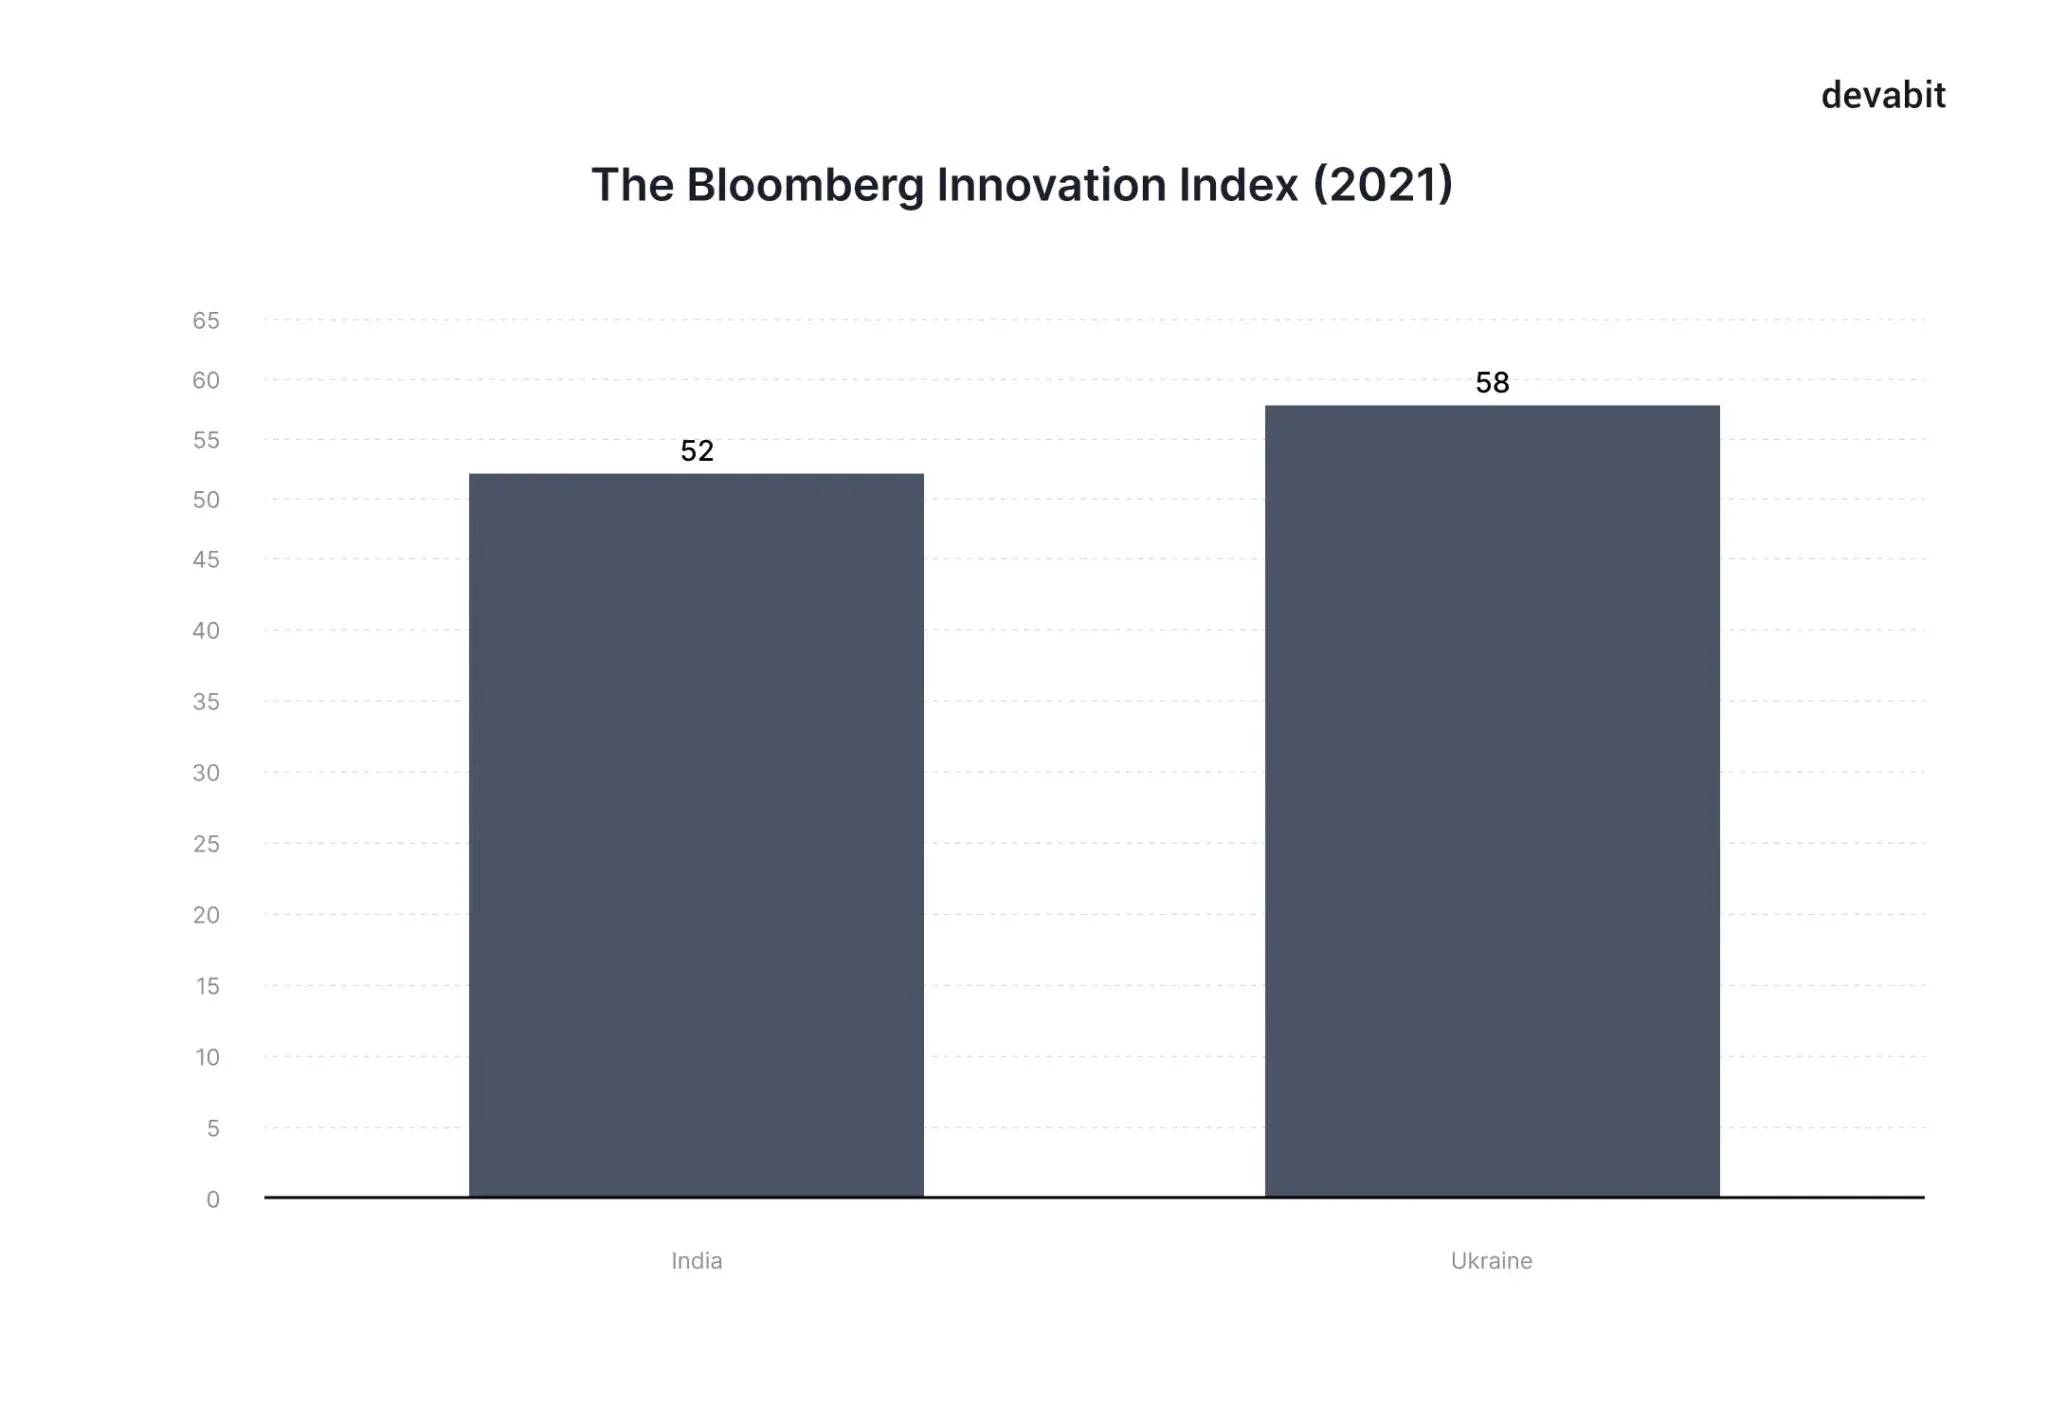 Outsourcing in India vs. Ukraine: The Bloomberg Innovation Index by devabit